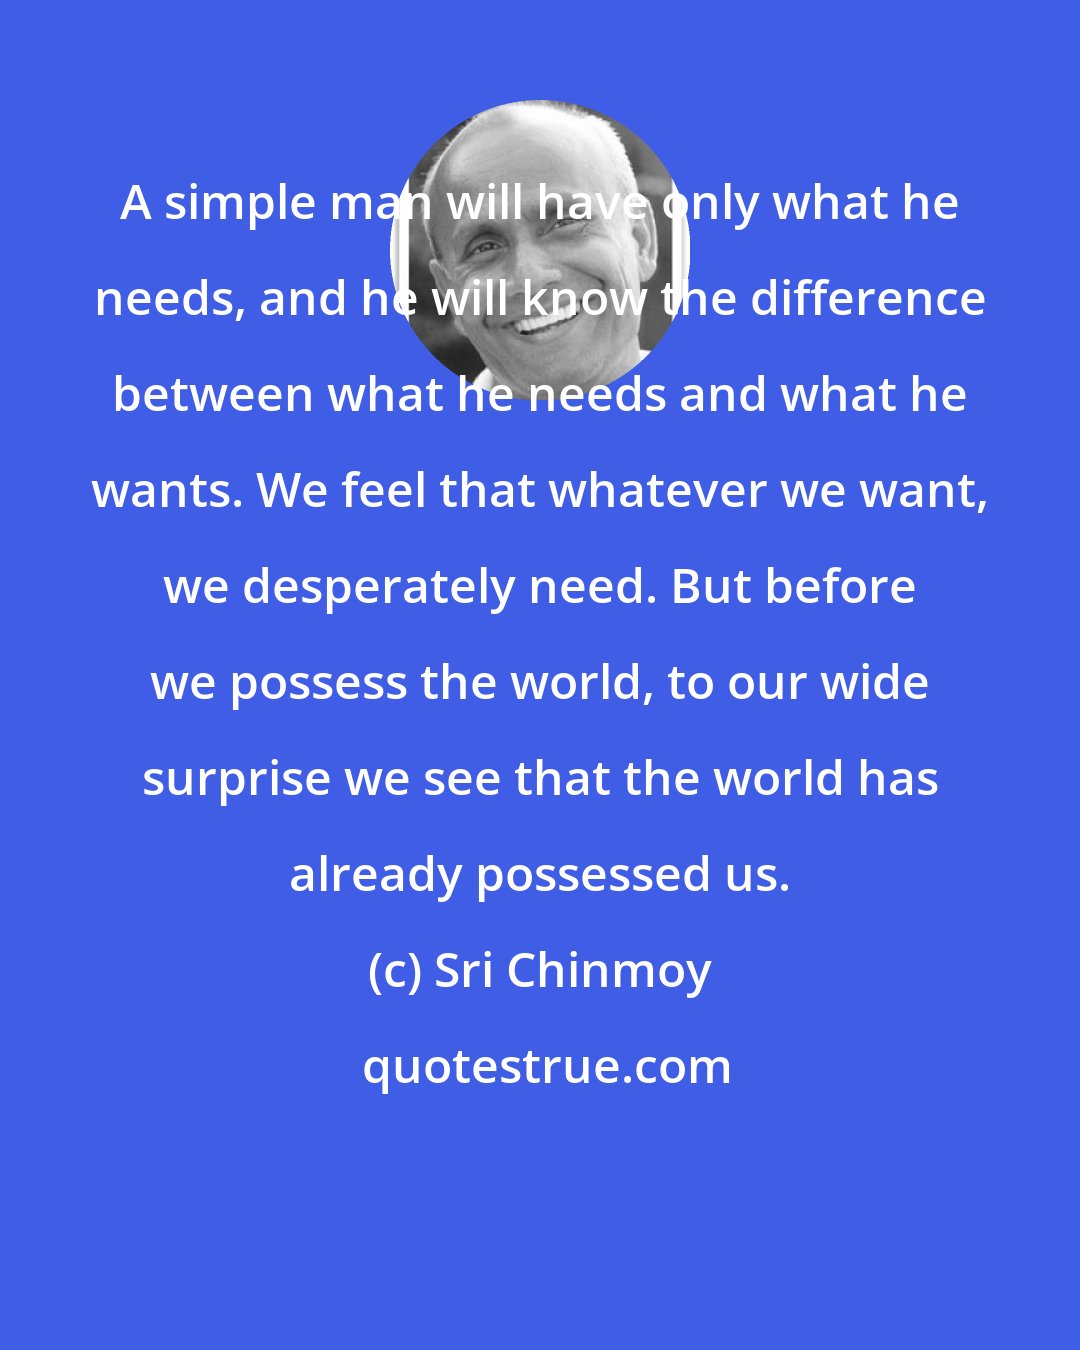 Sri Chinmoy: A simple man will have only what he needs, and he will know the difference between what he needs and what he wants. We feel that whatever we want, we desperately need. But before we possess the world, to our wide surprise we see that the world has already possessed us.